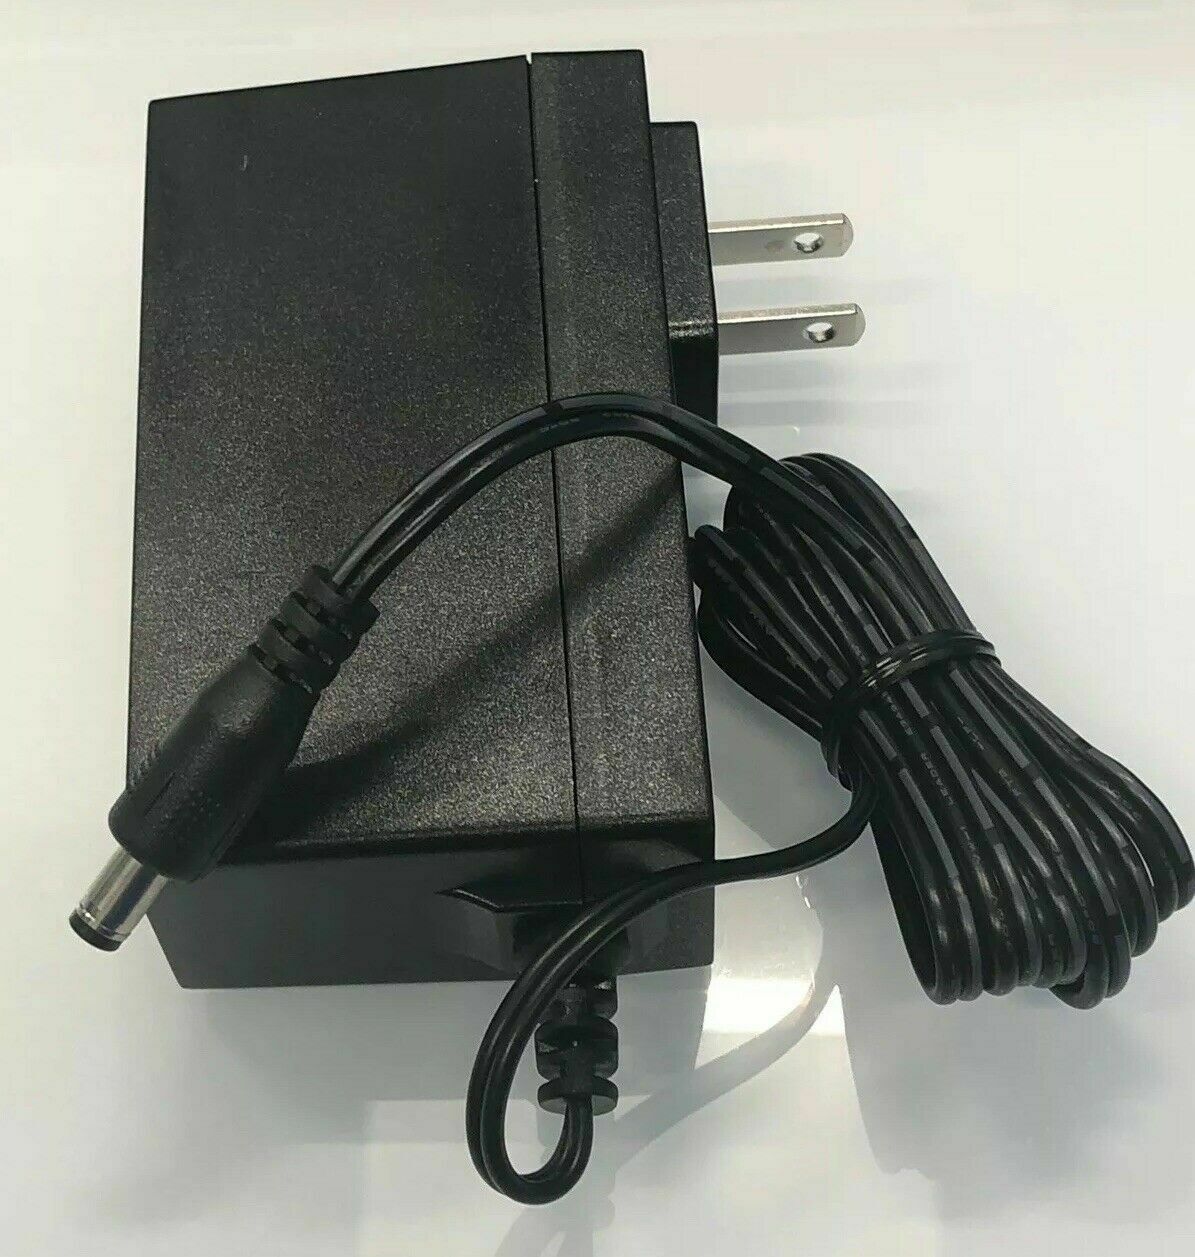 Switchable I.T.E. Power supply Model # MU42-3120300-A1 12V 3A **NEW** Country/Region of Manufactu - Click Image to Close